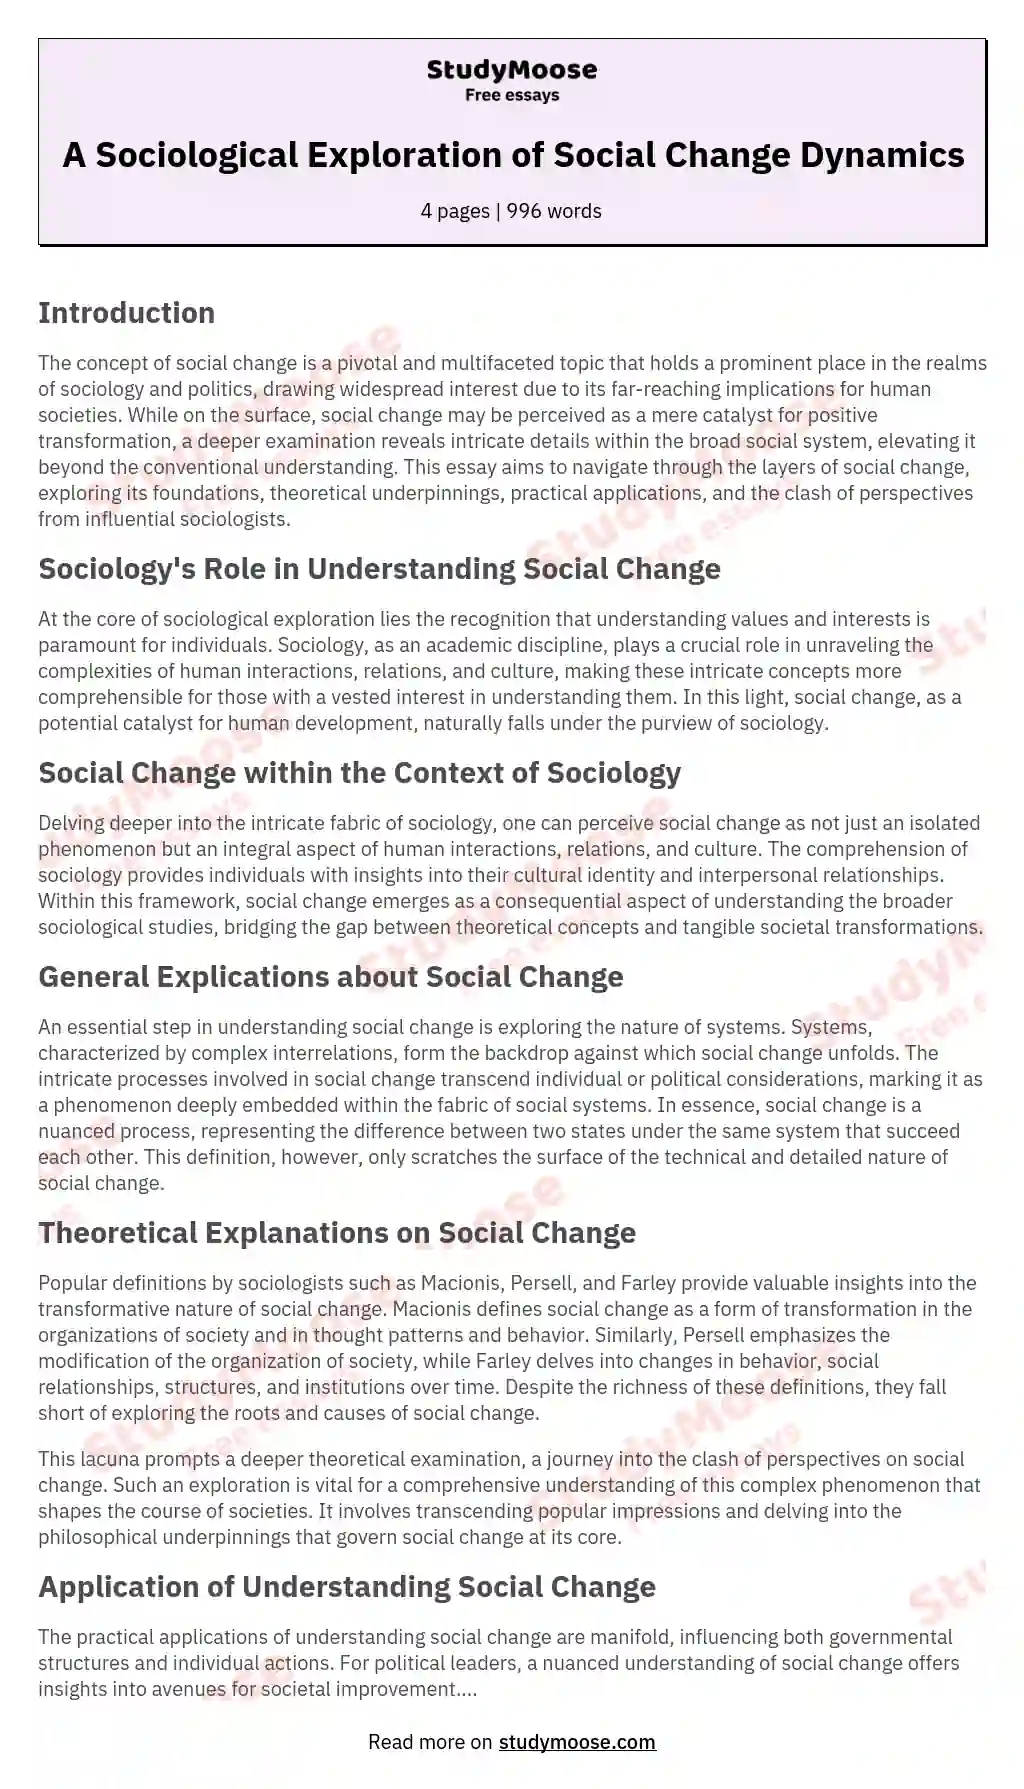 Social Change in the Perspectives of Max Weber and Karl Marx